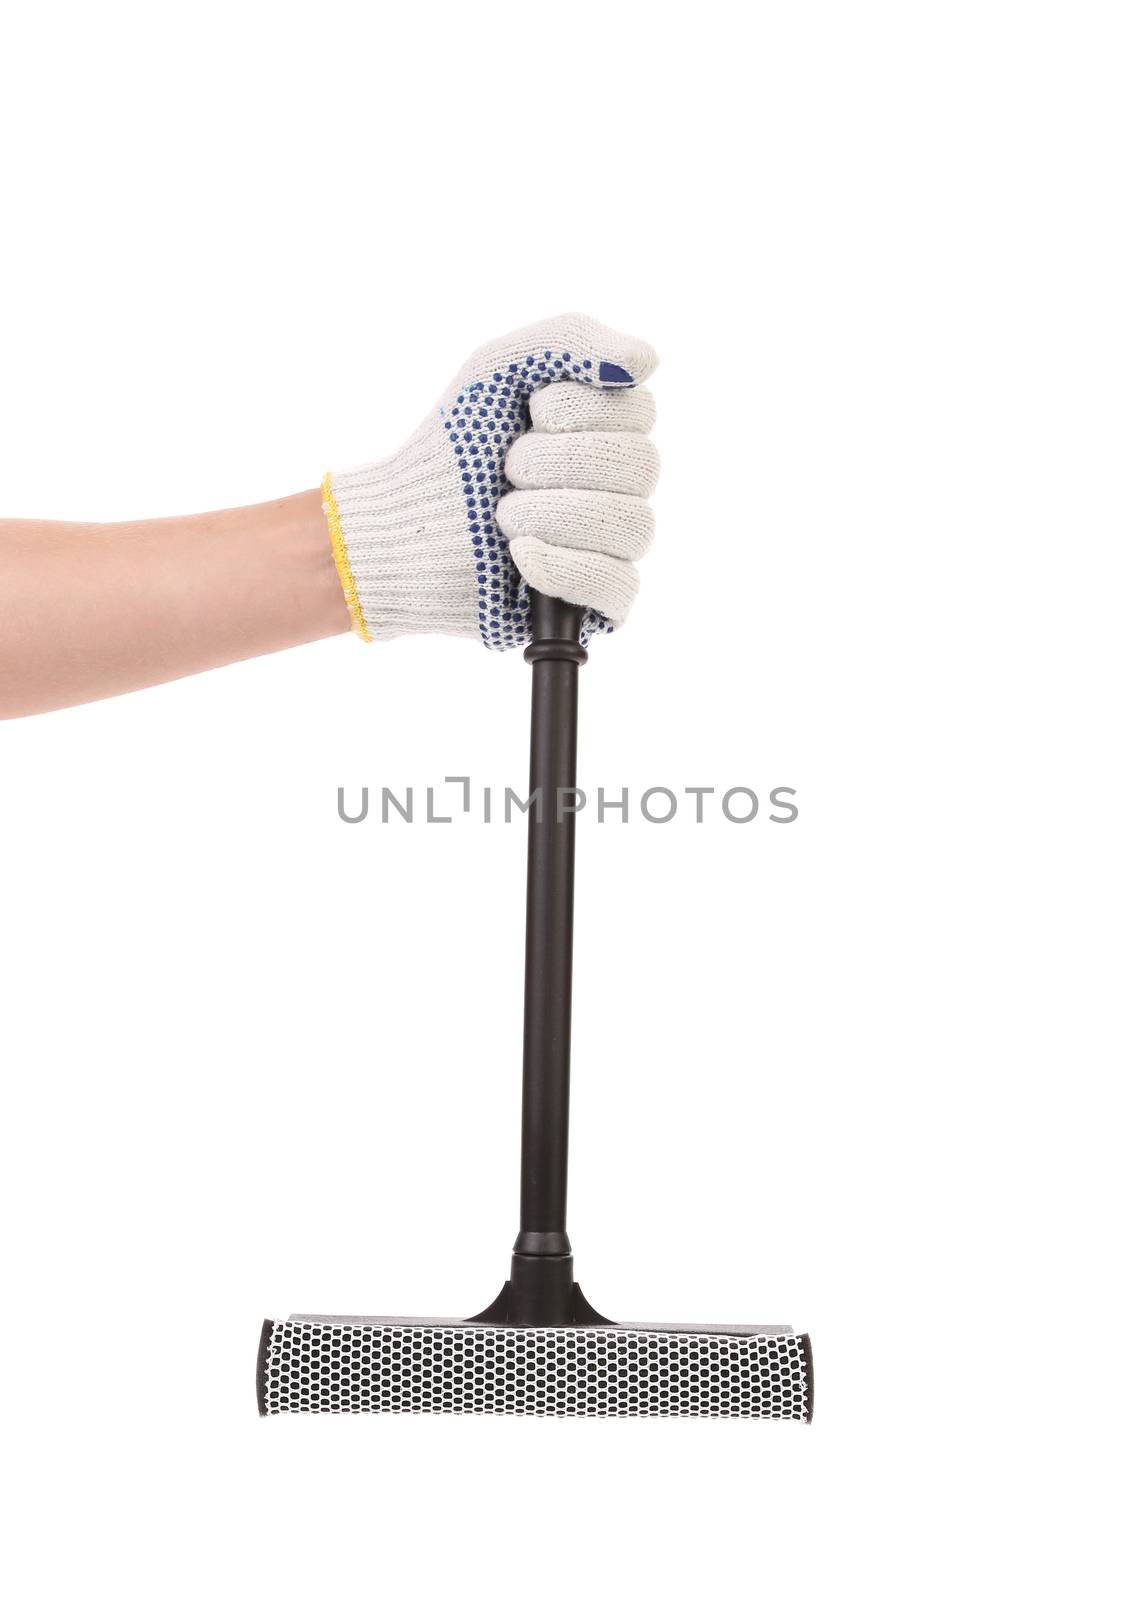 Hand holds squeegee for windows. Isolated on a white background.